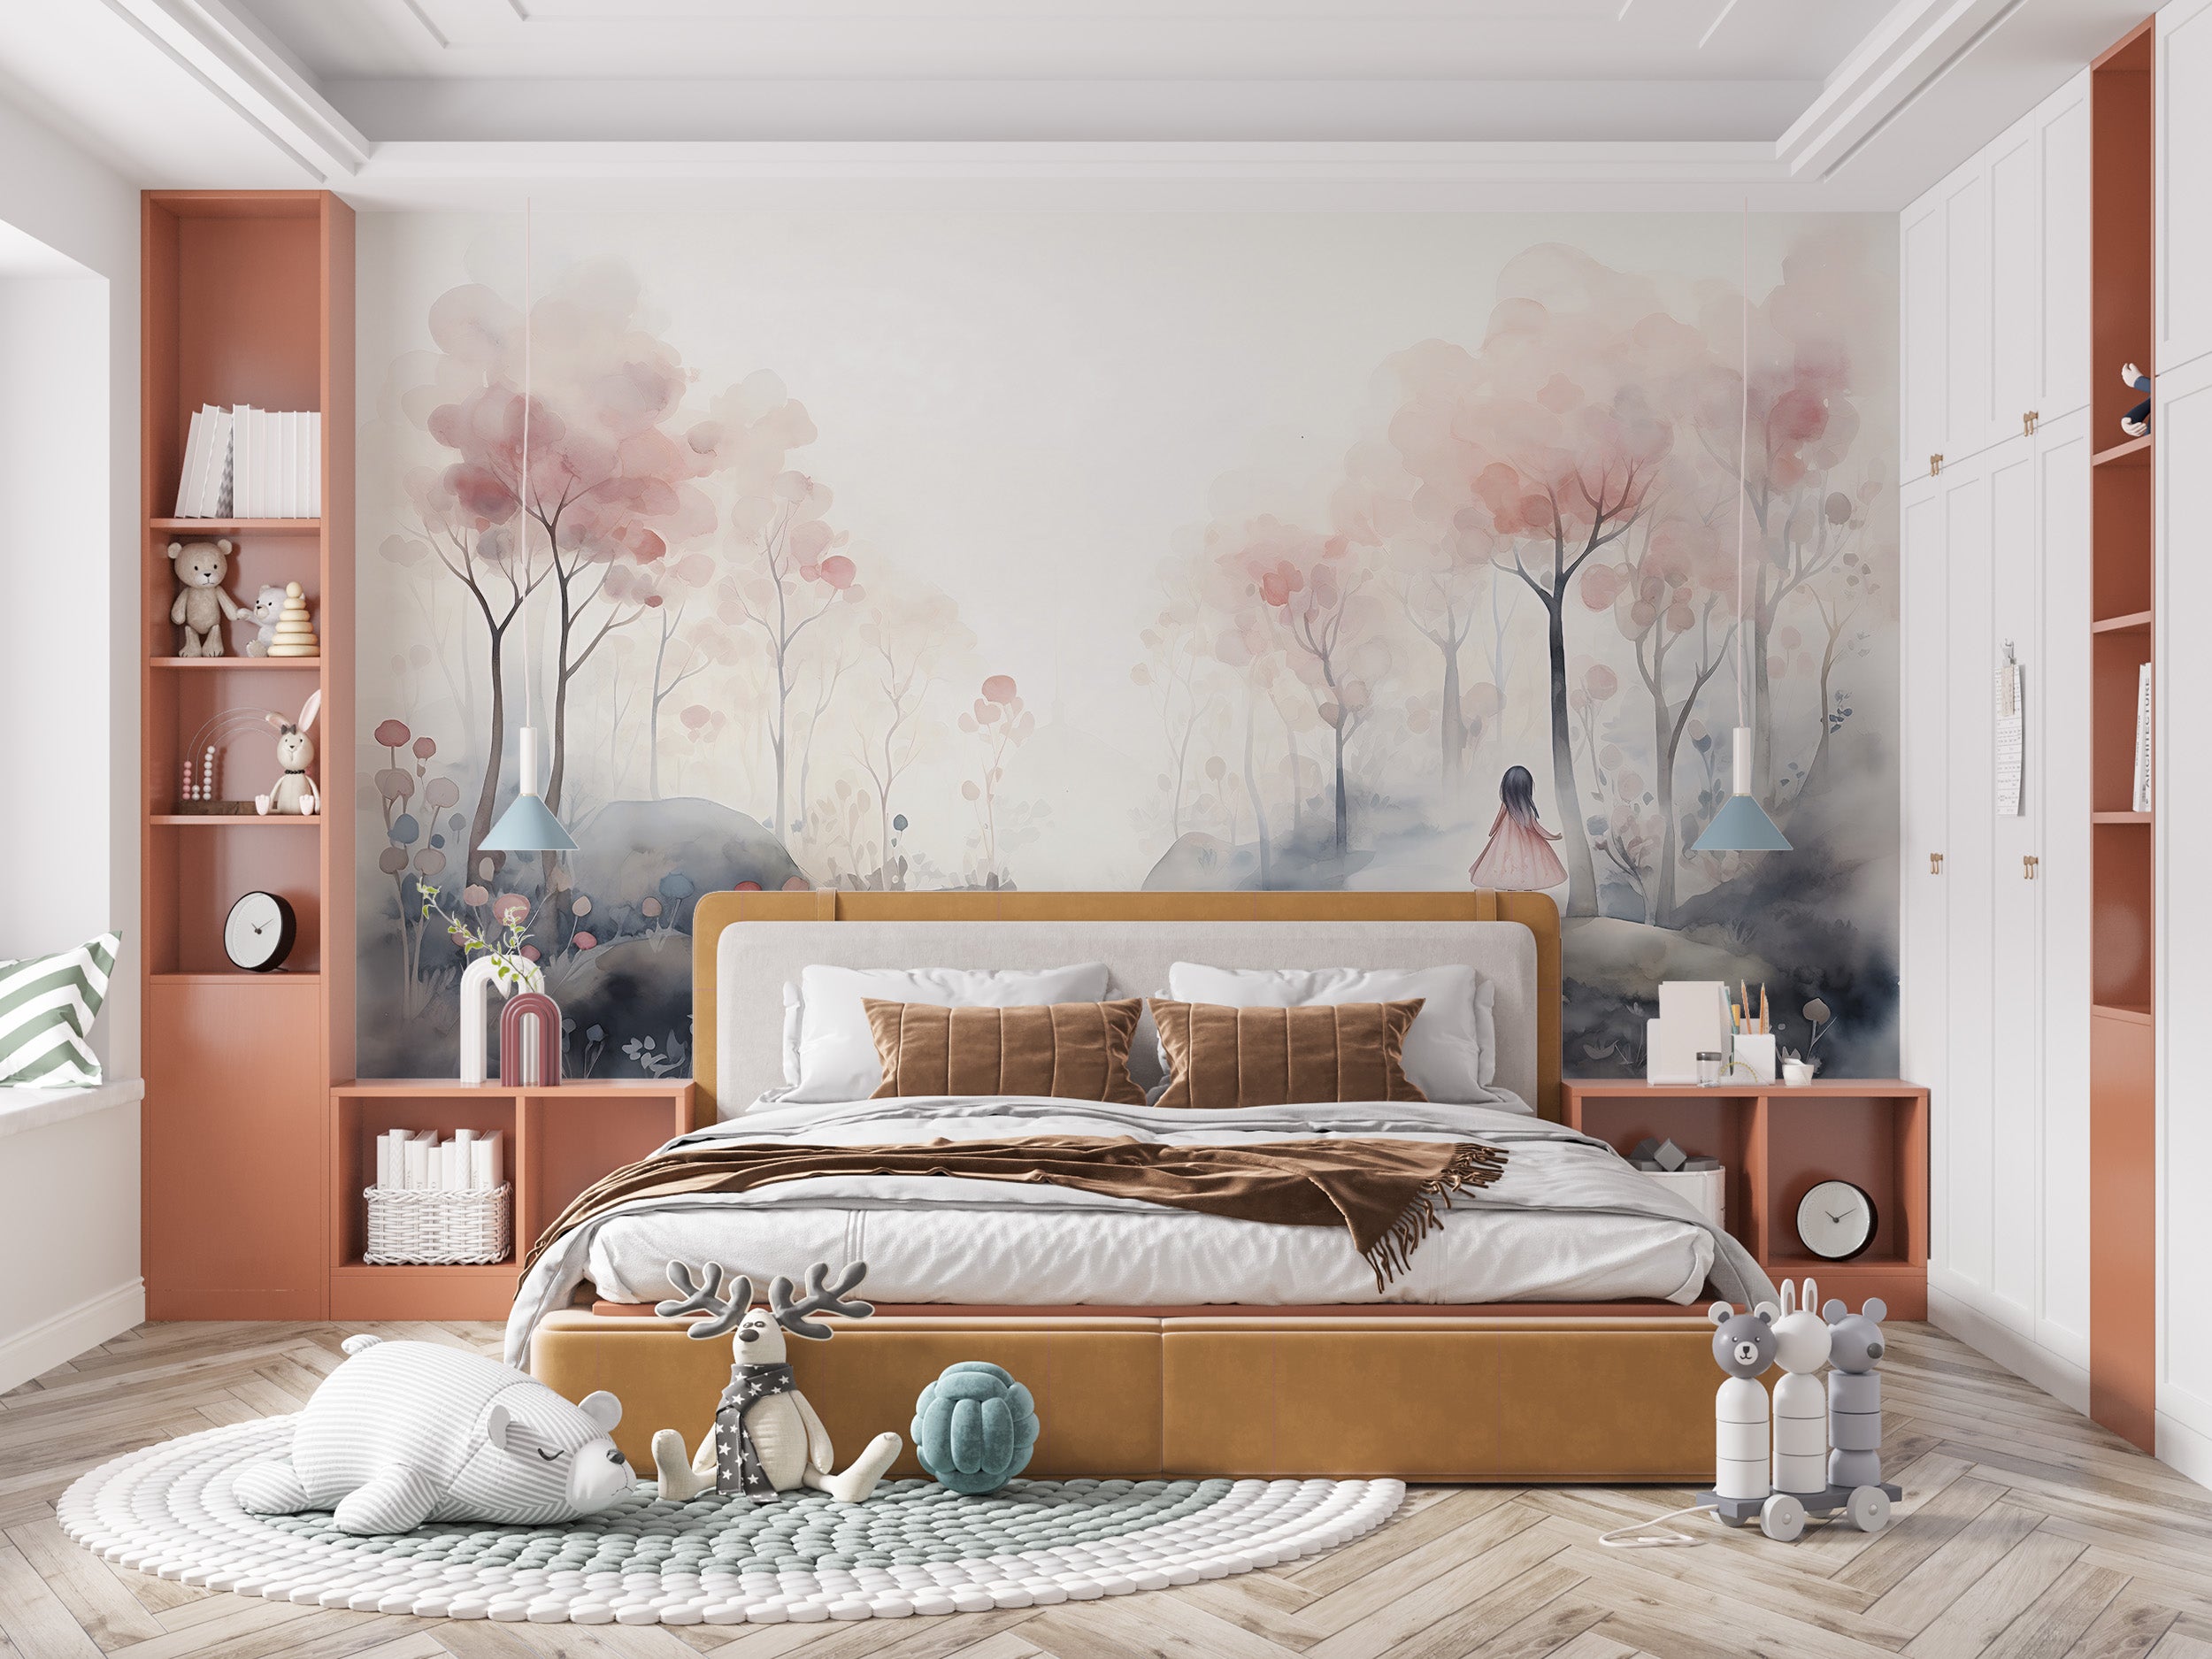 Create an Enchanted Ambiance with Kids' Wall Art